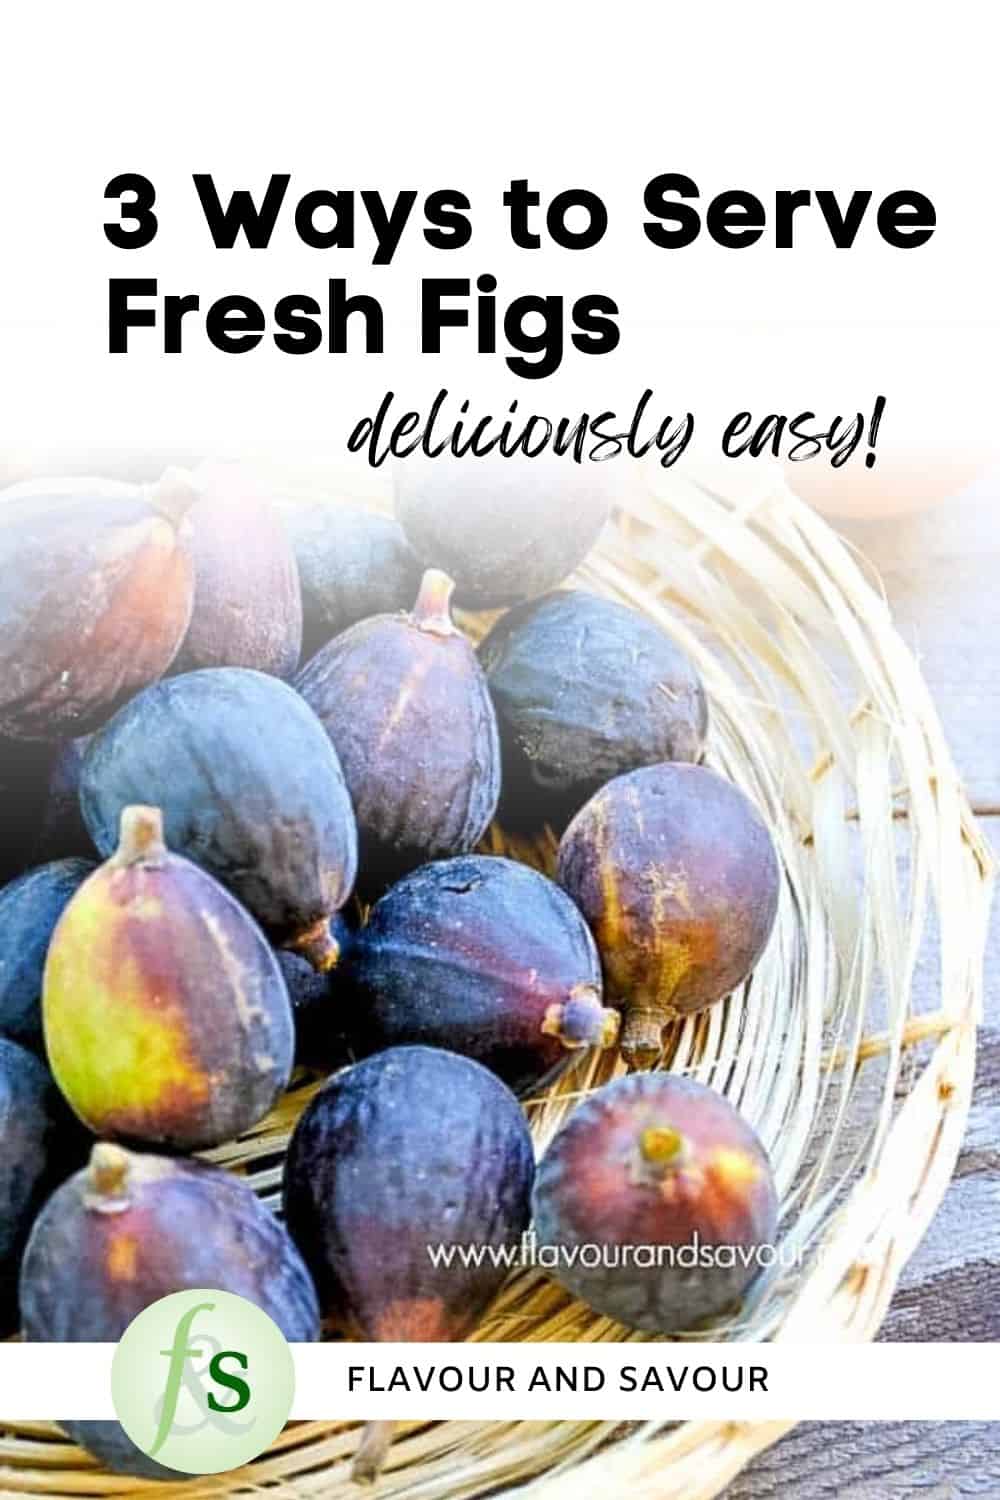 Image with text for 3 ways to serve fresh figs.